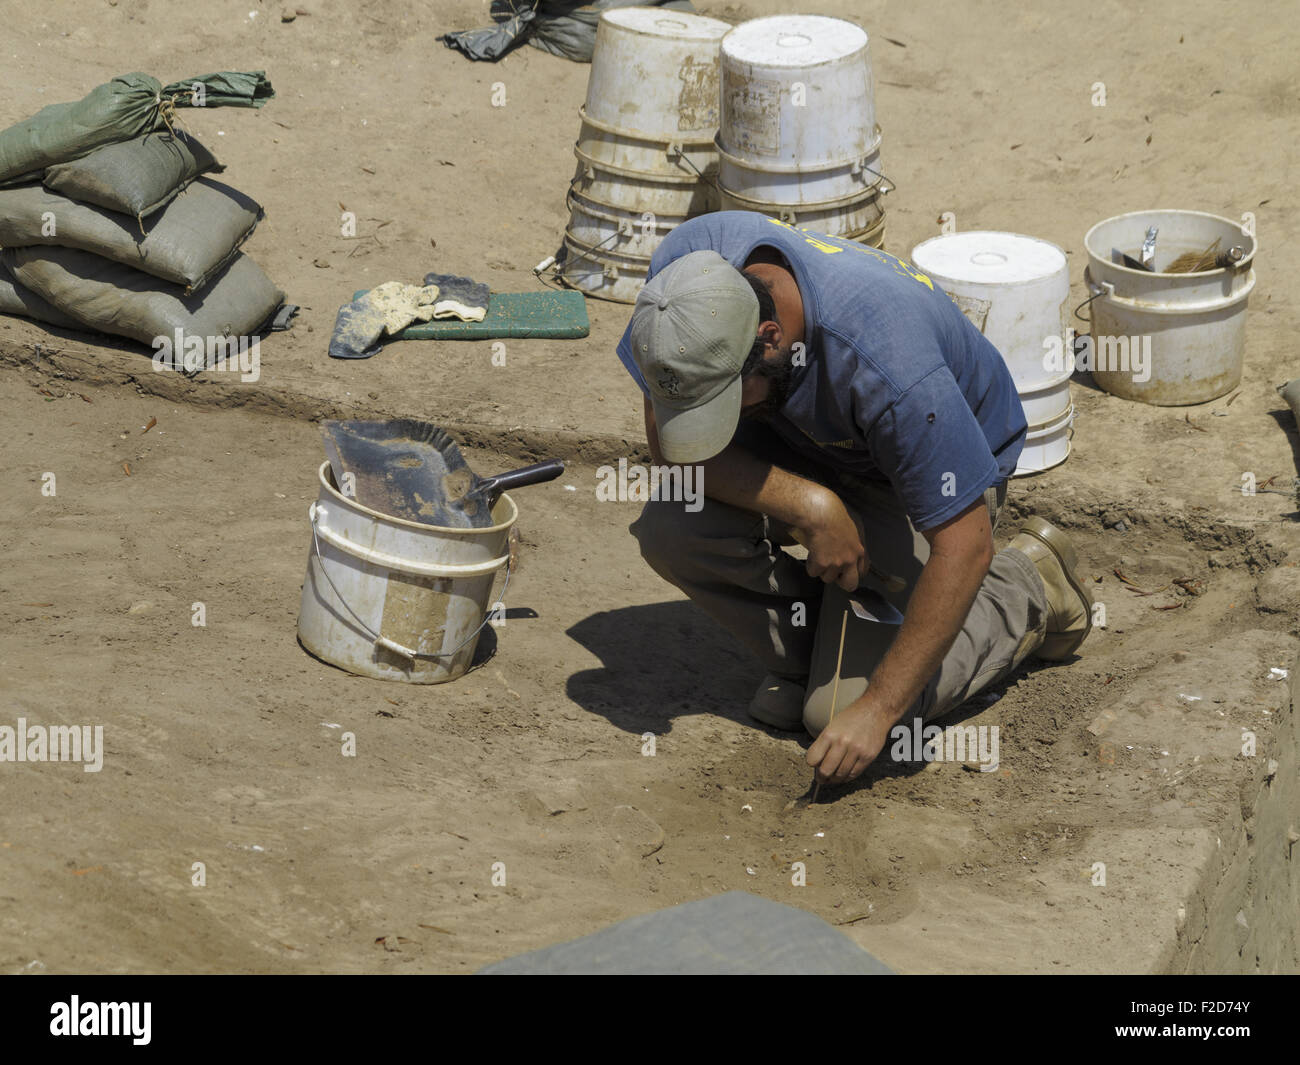 Jamestown Rediscovery archaeologist kneeling surroundded by buckets and tools Stock Photo